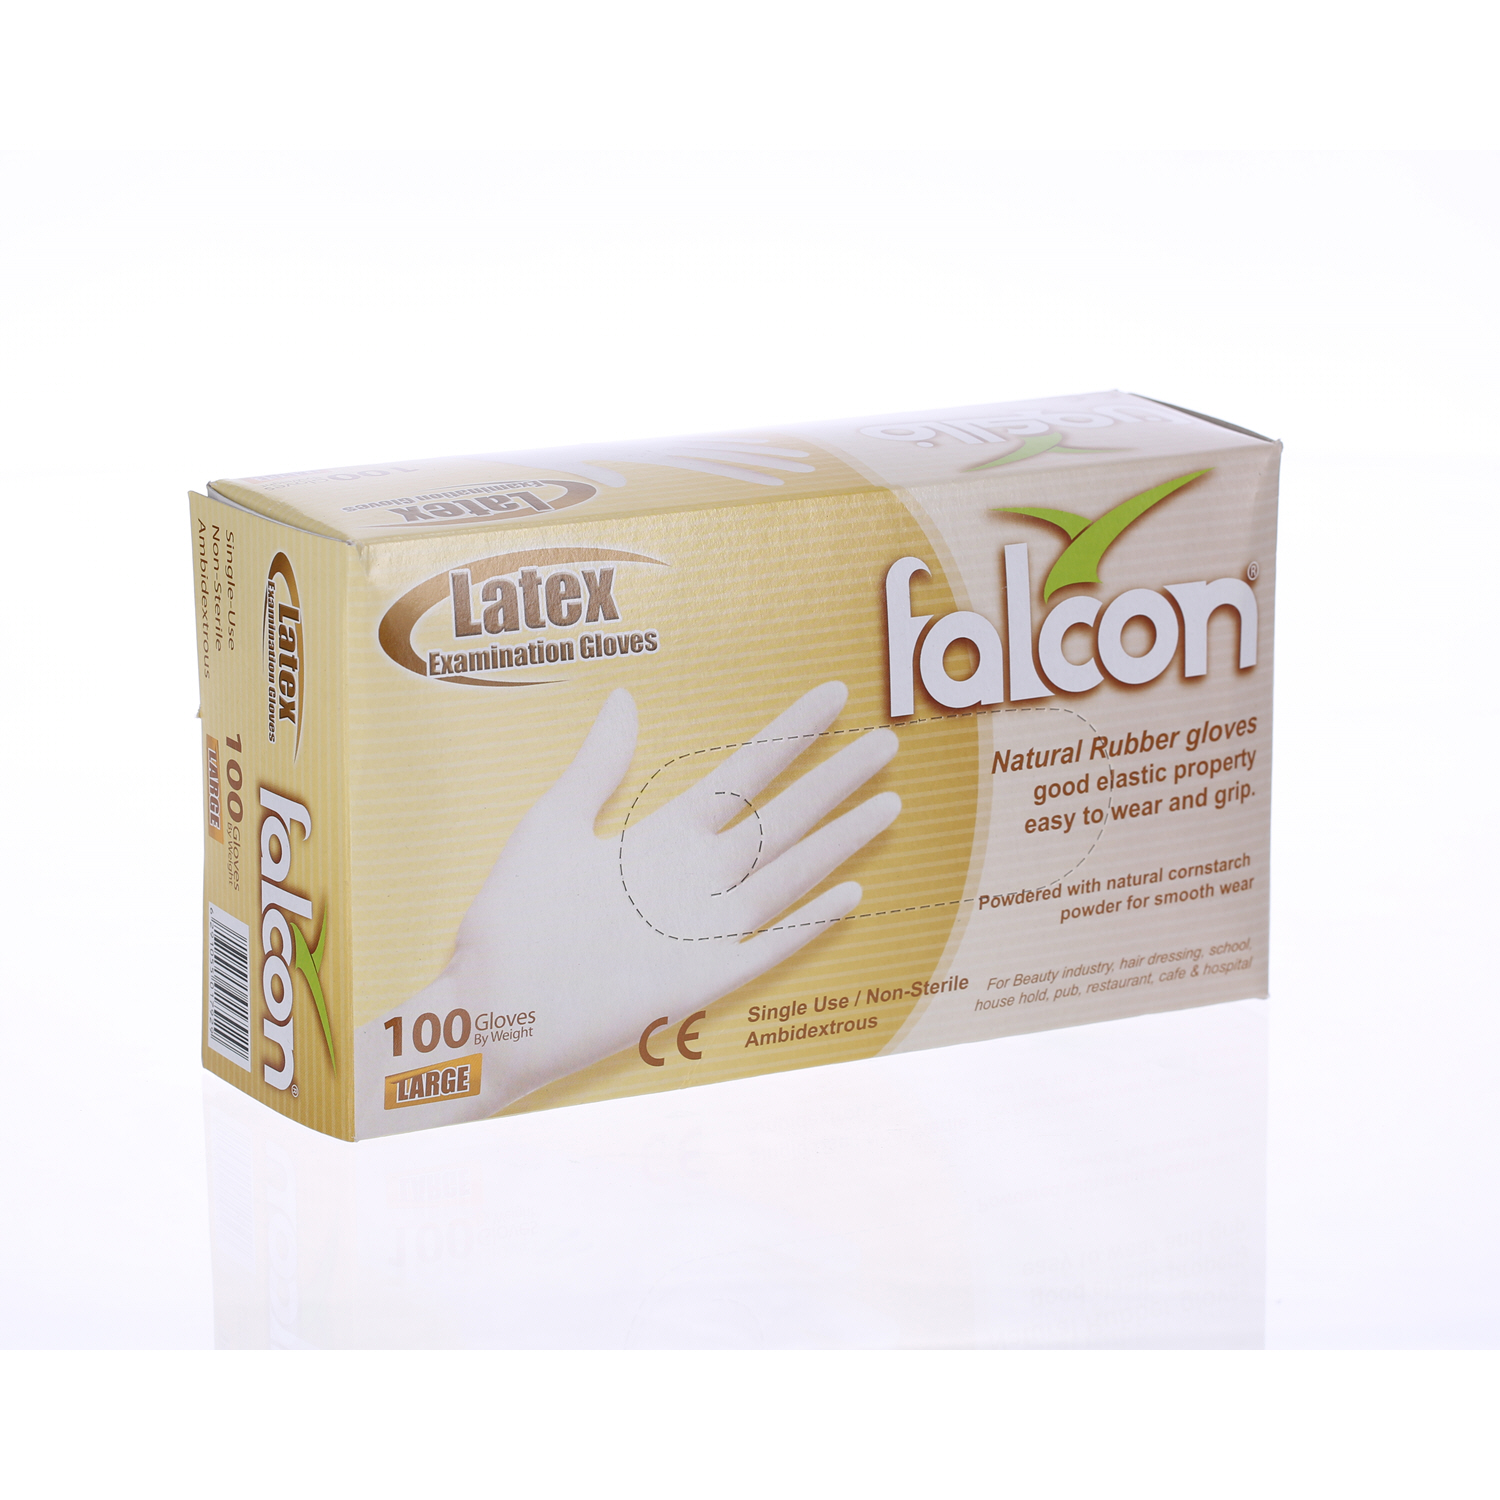 Falcon Latex Gloves Large 100 Pieces